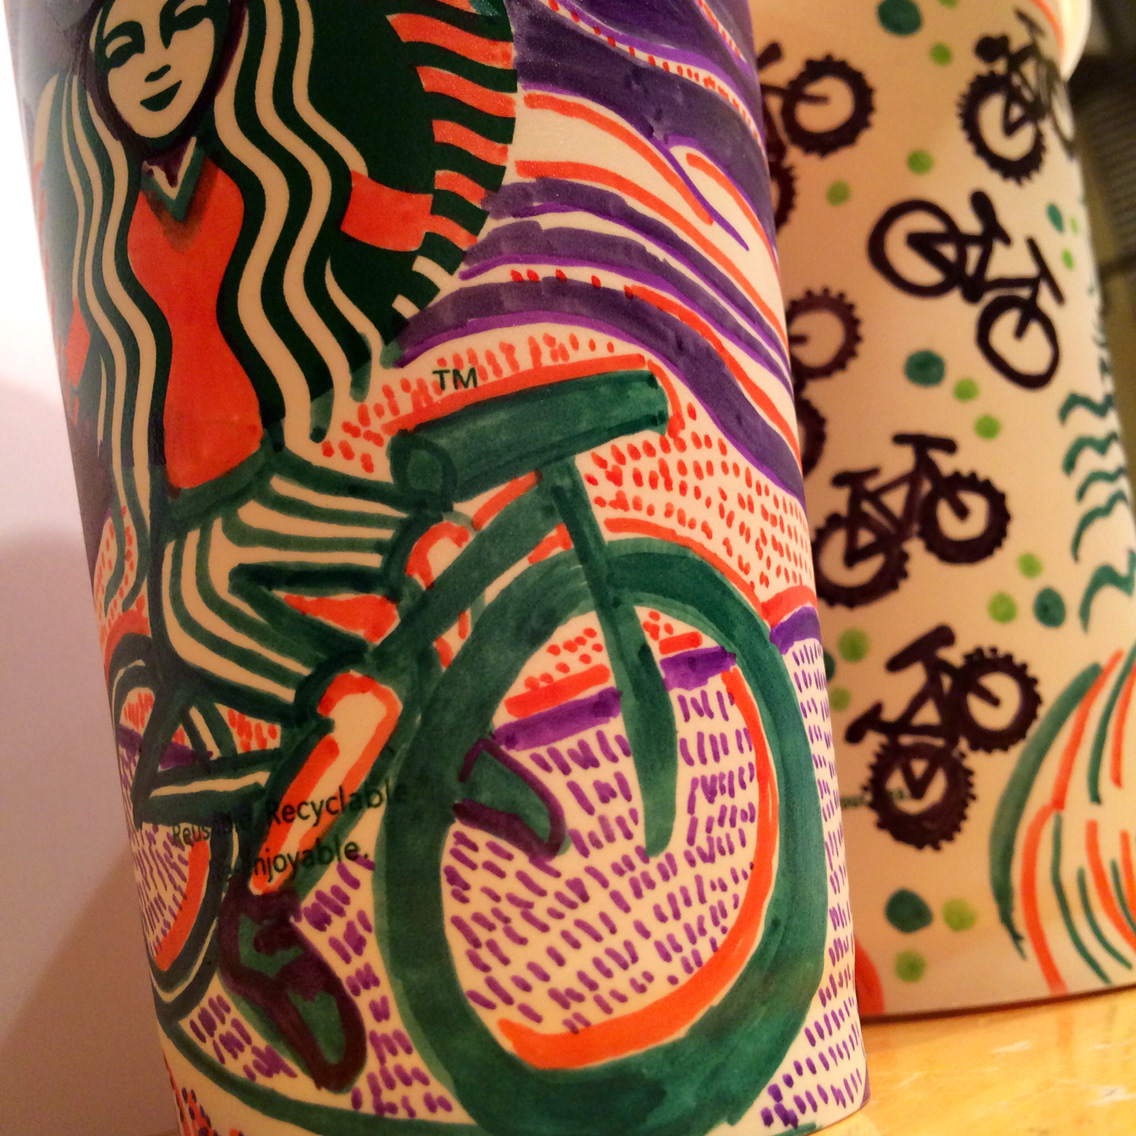 bikes Coffee cups package design  Drawing  doodles